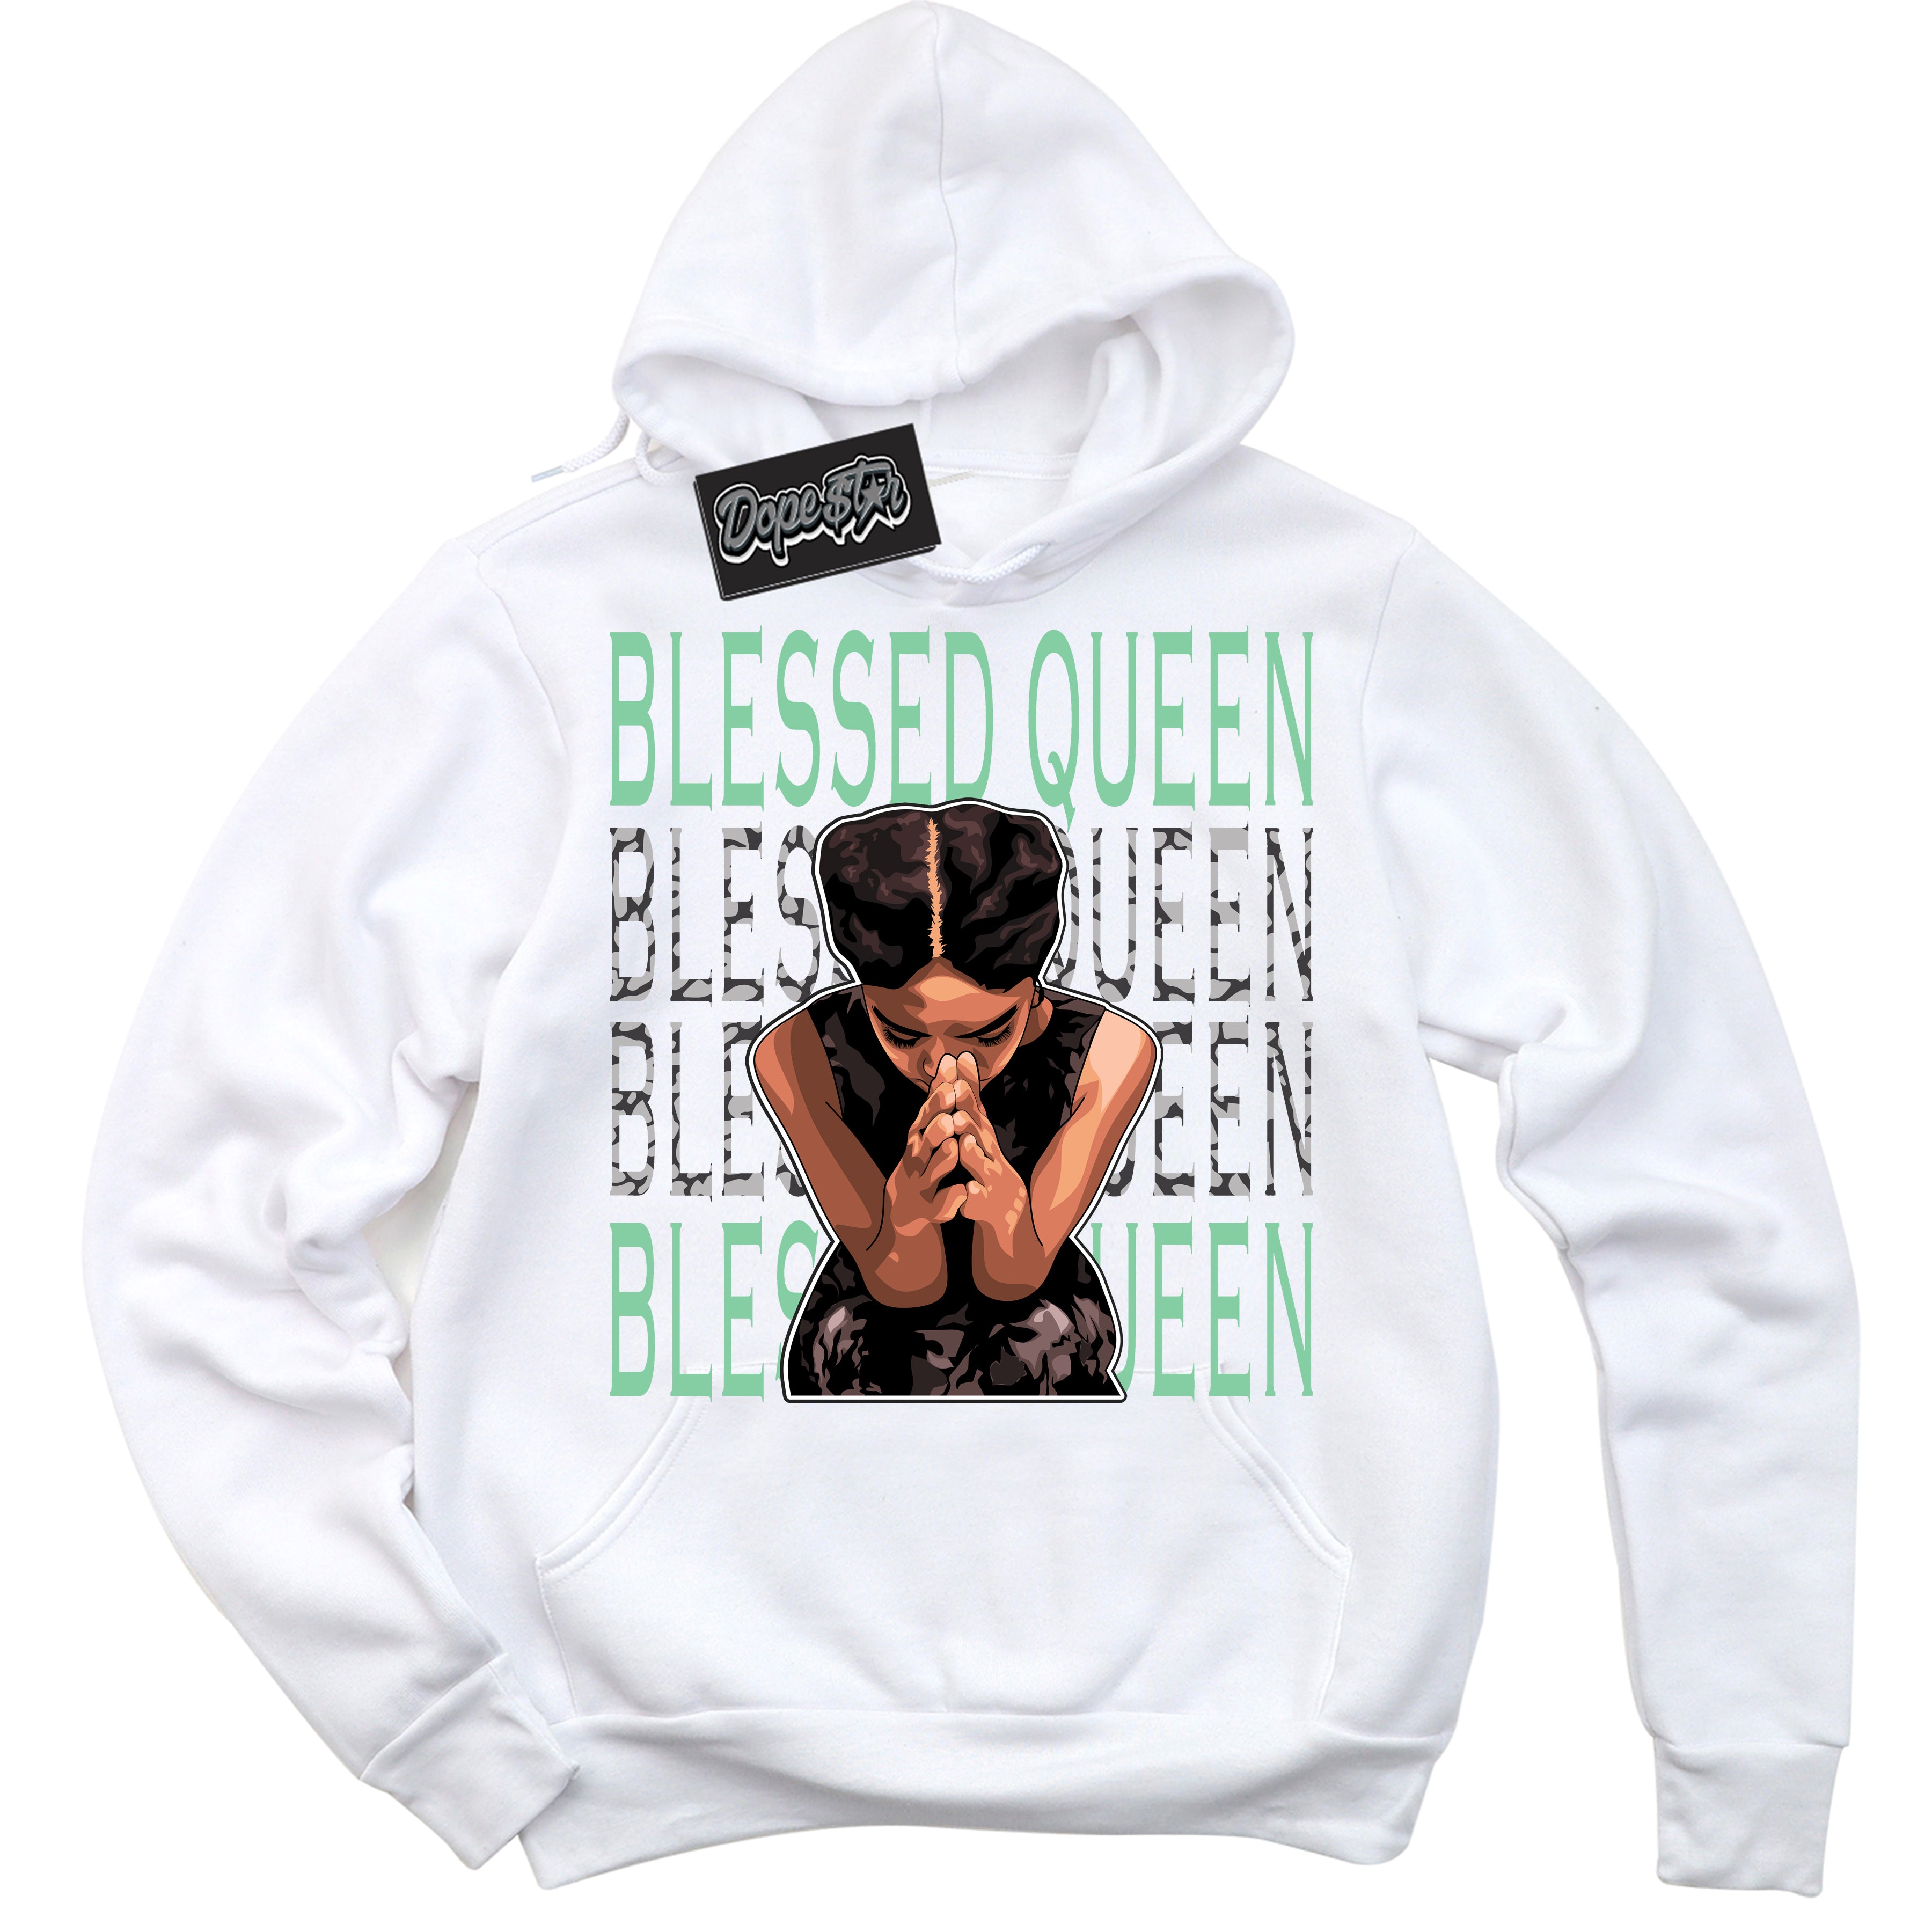 Cool White Graphic DopeStar Hoodie with “ Blessed Queen “ print, that perfectly matches Green Glow 3s sneakers